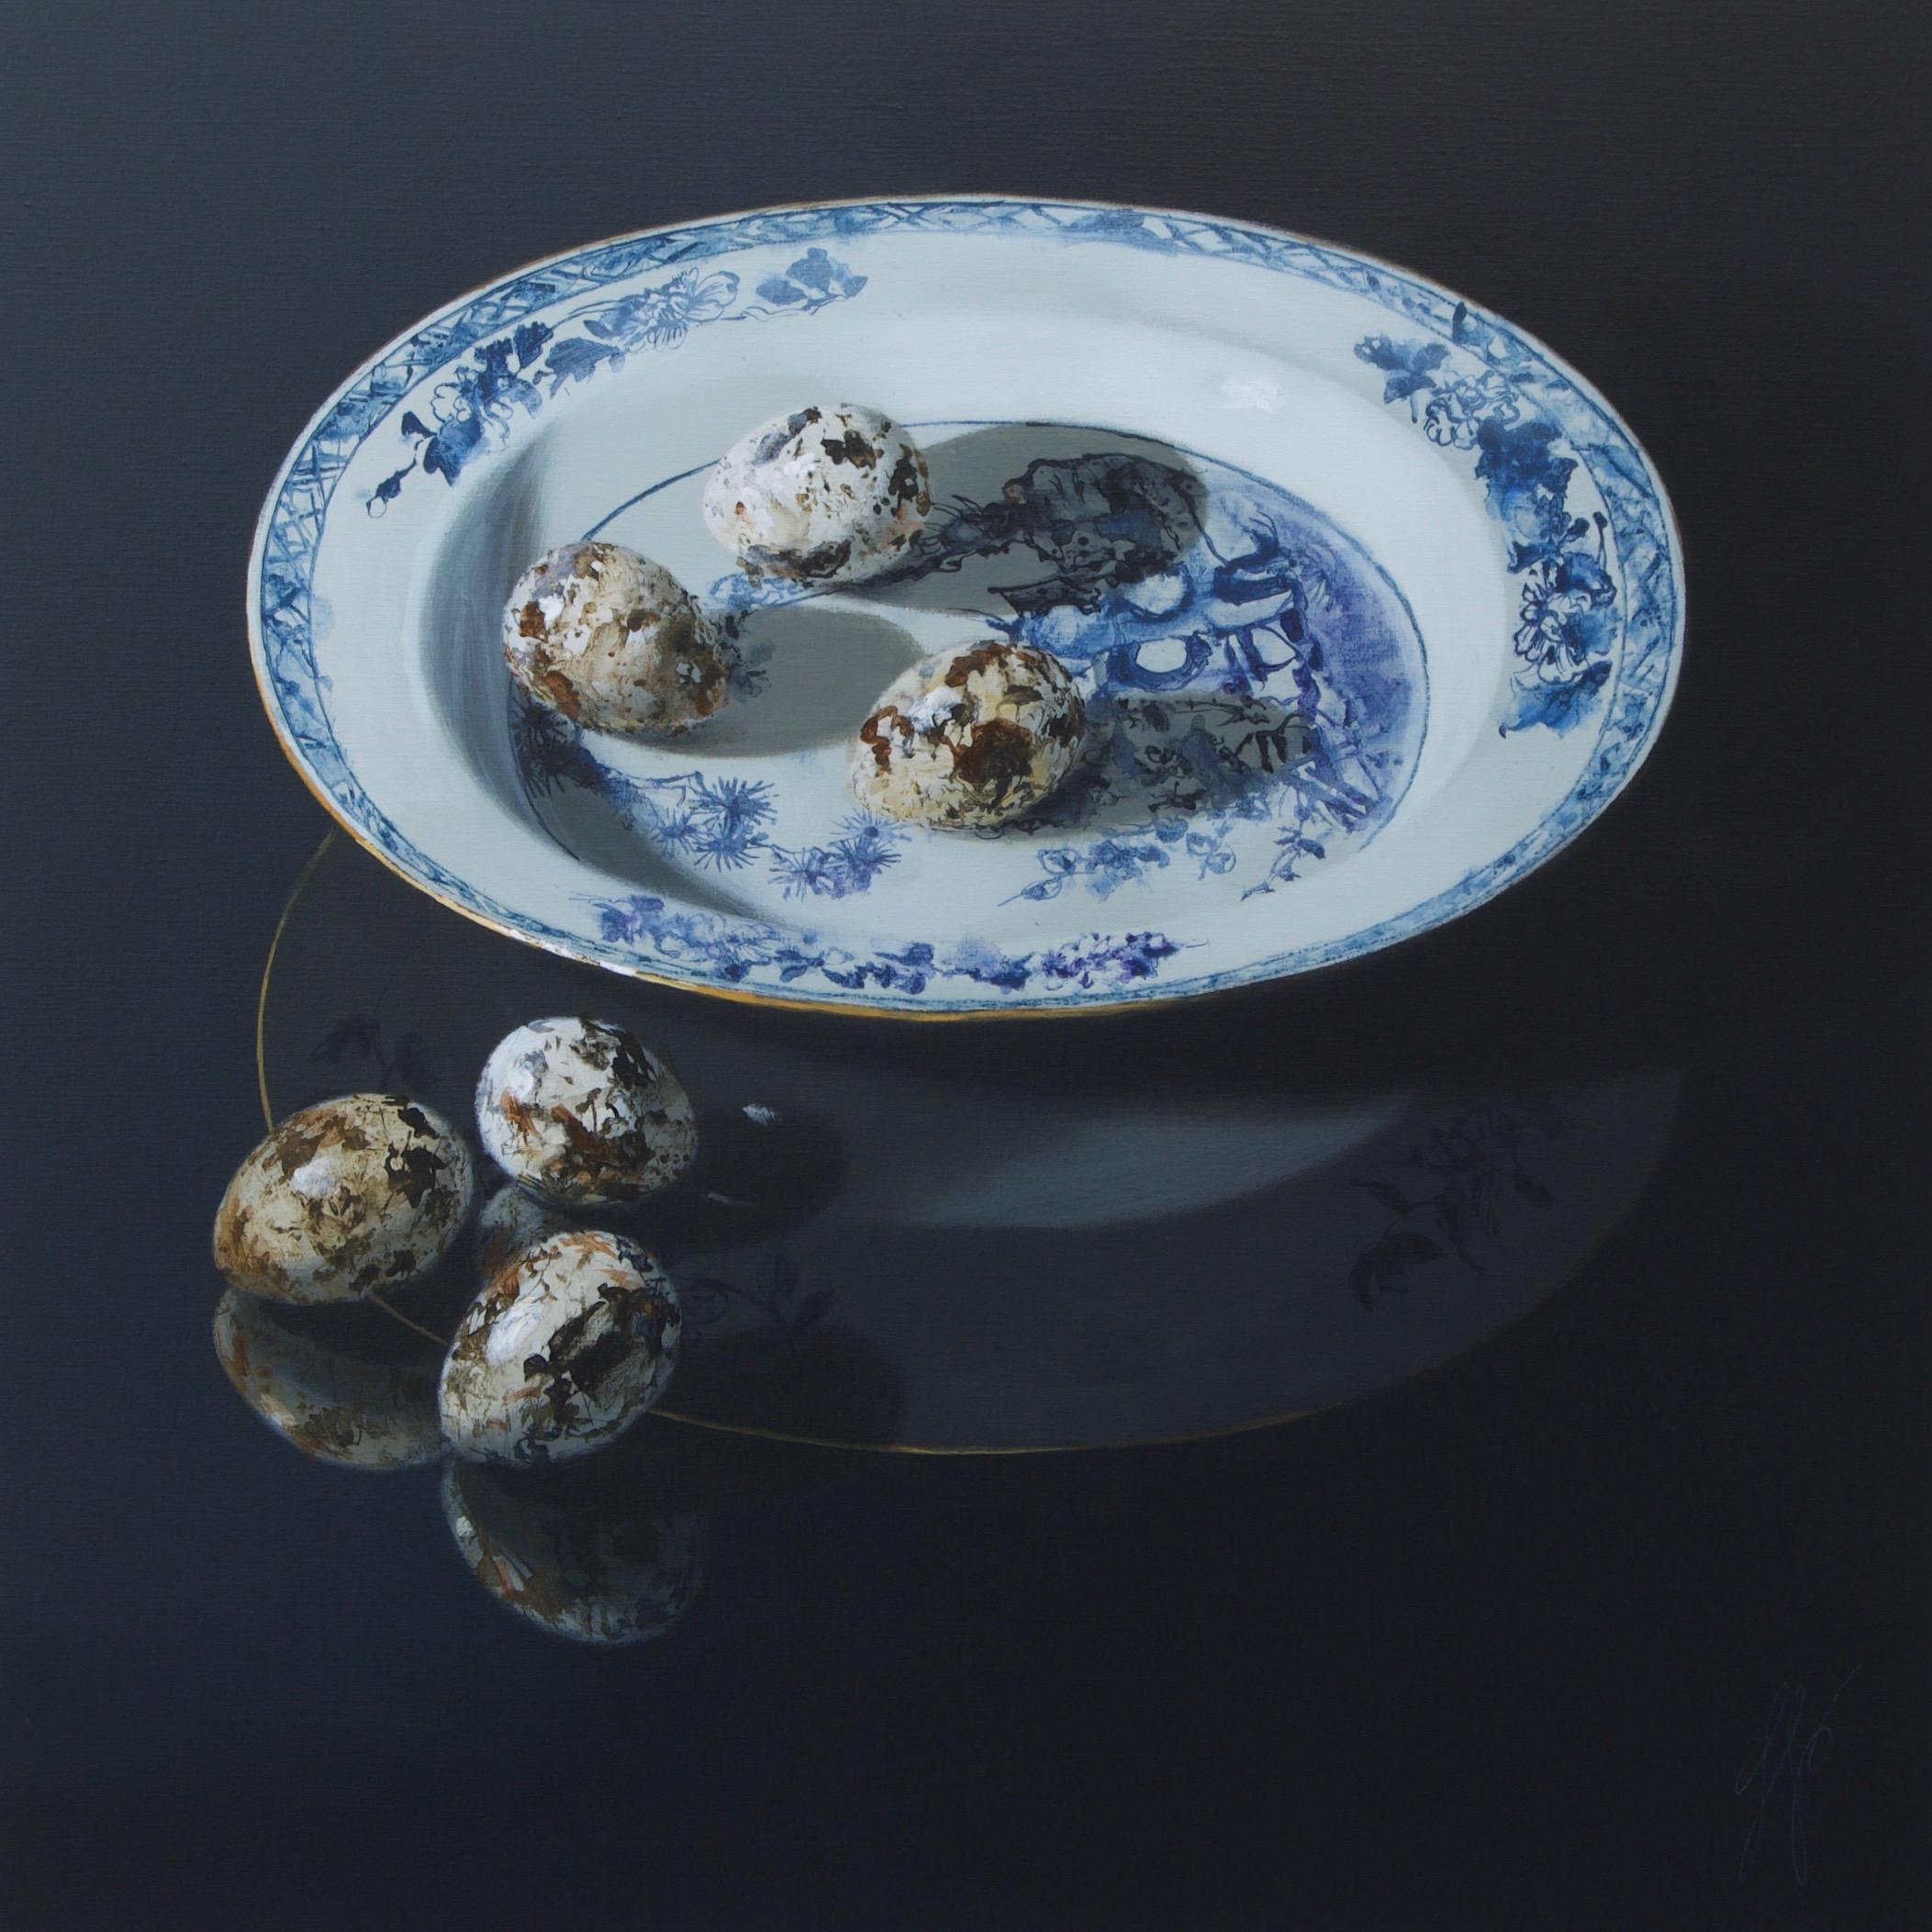 Sasja Wagenaar Figurative Painting - "Quail eggs on Chinese porcelain plate" Contemporary Dutch Still-Life Painting